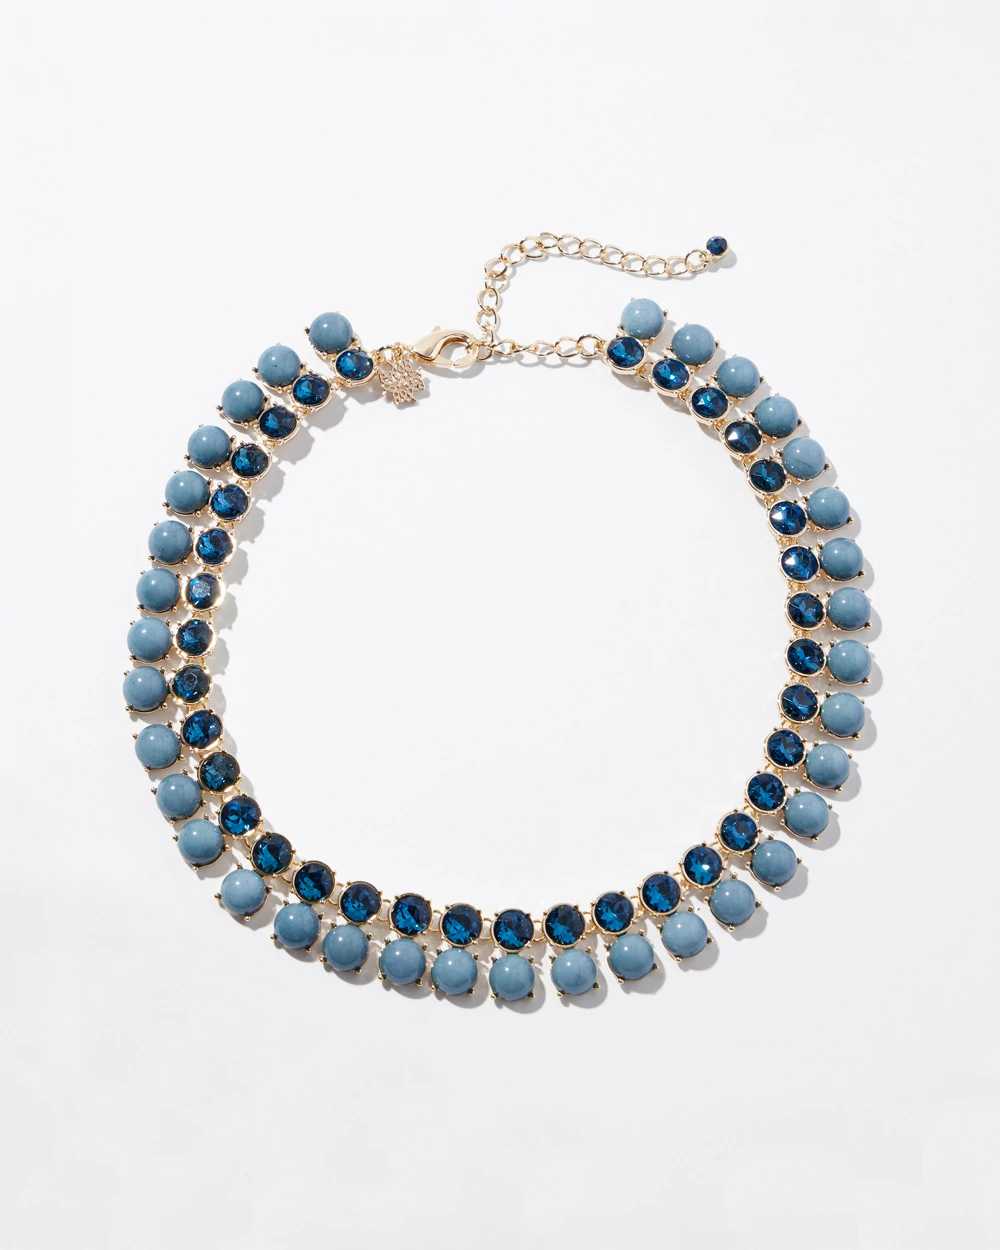 Gold Blue Double Row Short Strand Necklace click to view larger image.